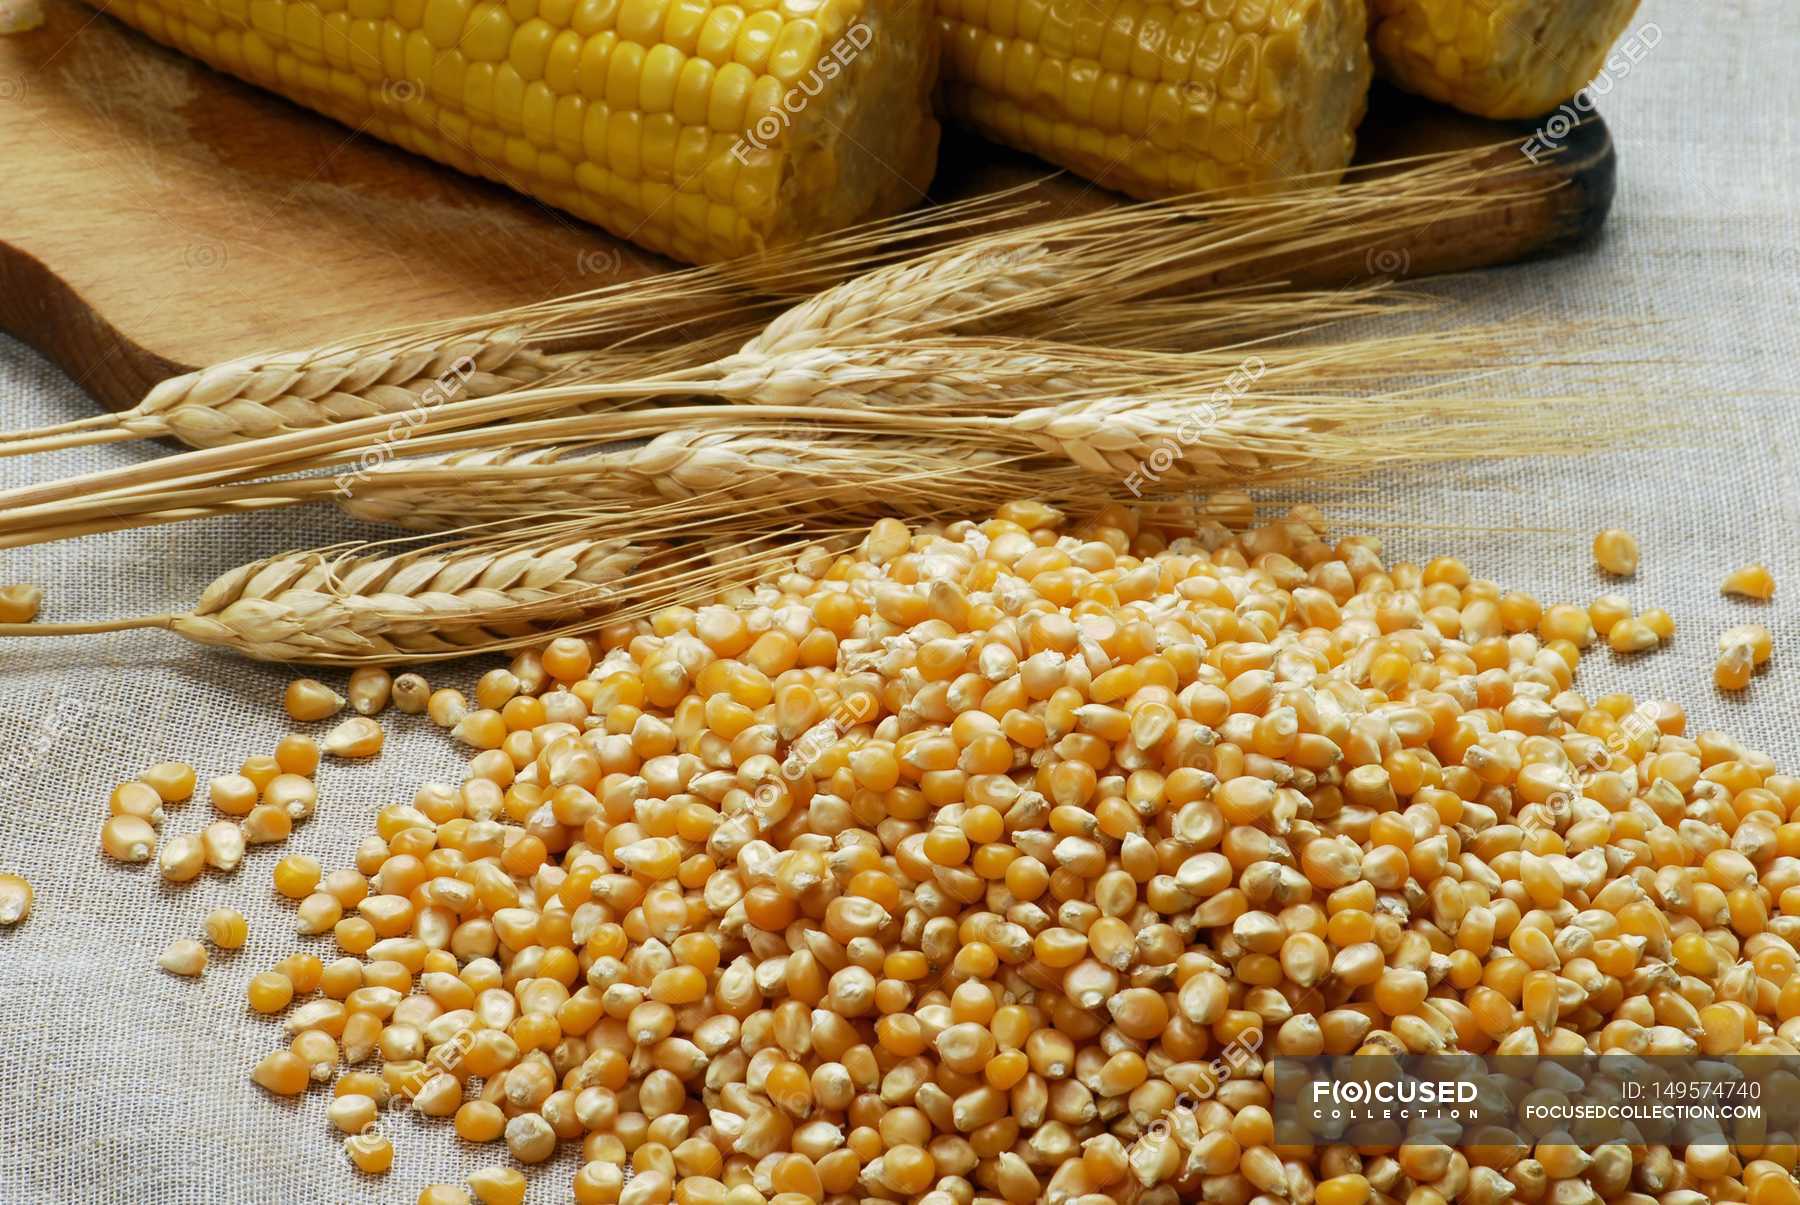 Corn kernels and cereal ears — Stock Photo | #149574740